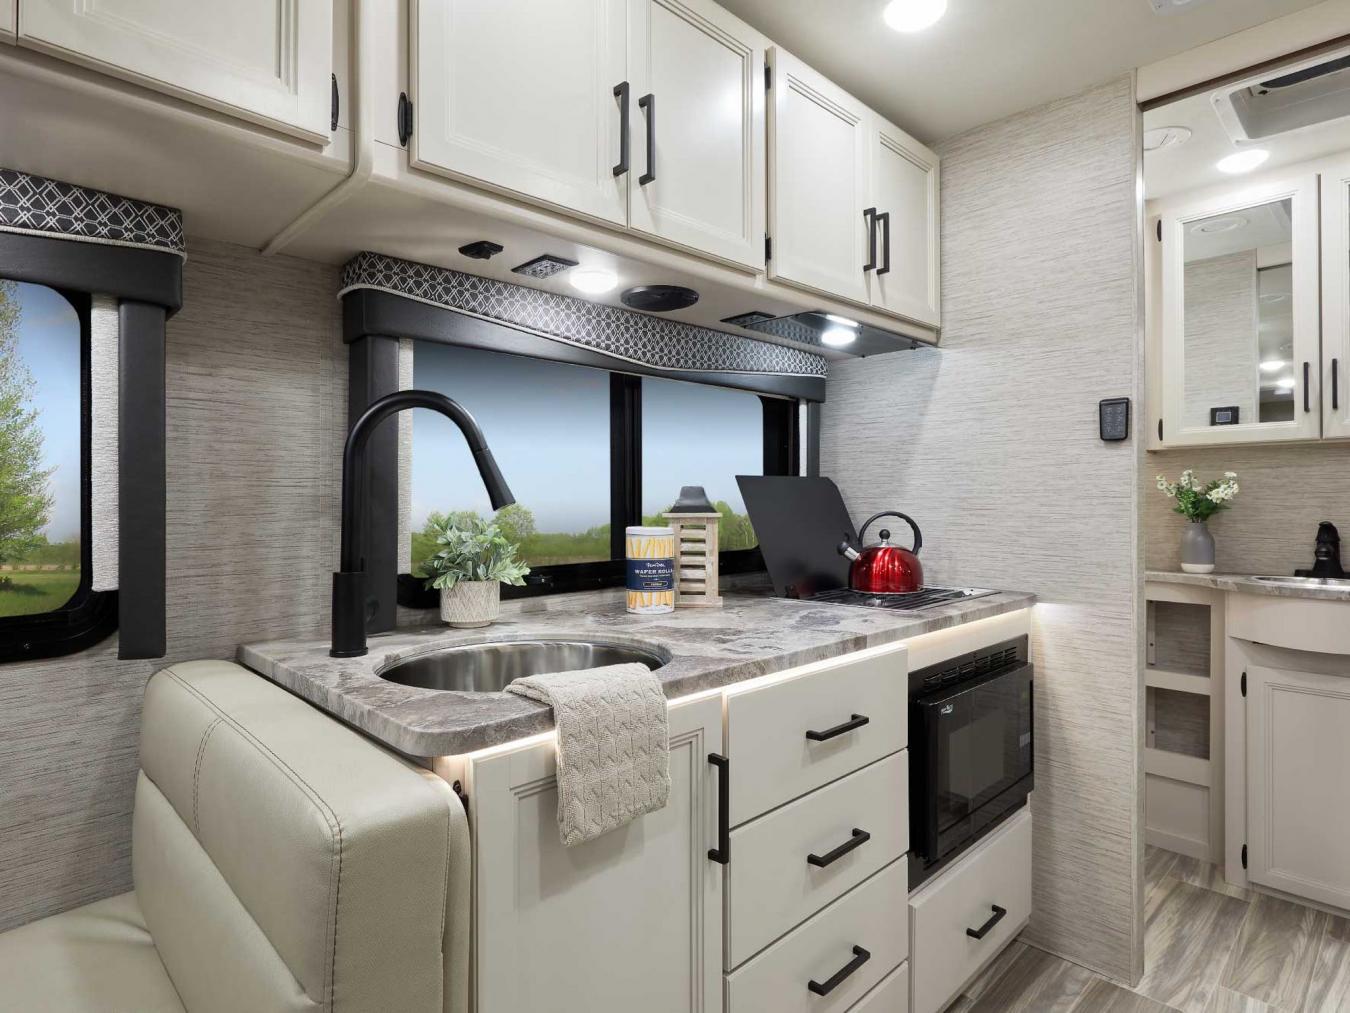 Kitchenette inside a Thor RV featuring a stovetop, round sink, and microwave